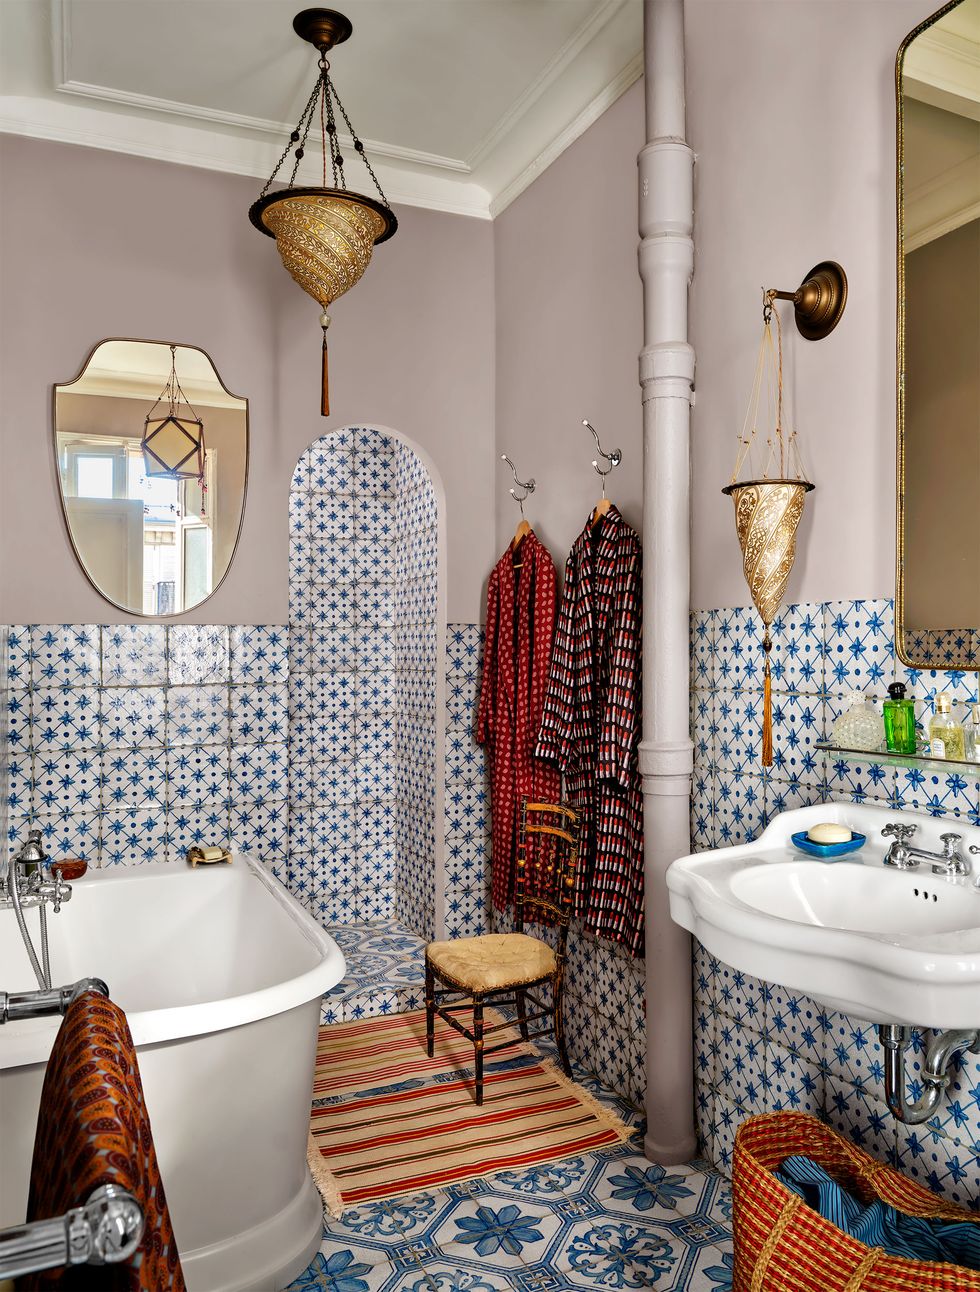 a bathroom has handmade blue and white tiles on the floor, halfway up the walls, and in the shower, matching cone shaped sconce and pendant, a deep bathtub, striped bath rug and two hanging bathrobes